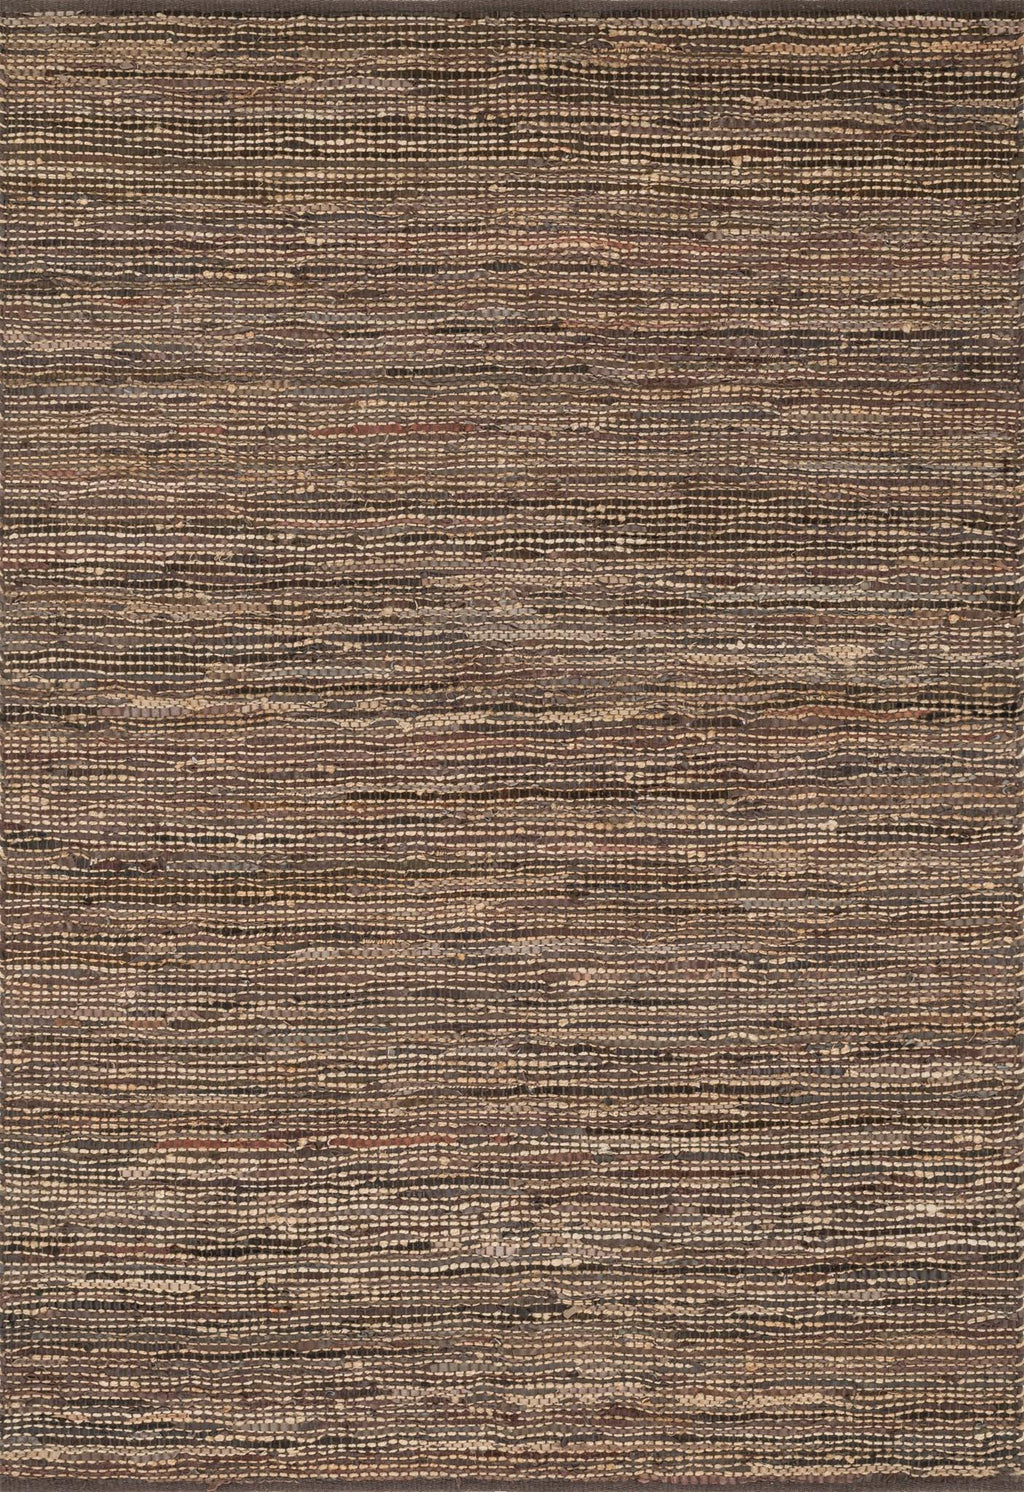 EDGE Collection Rug  in  BROWN Brown Small Hand-Woven Jute/Hemp